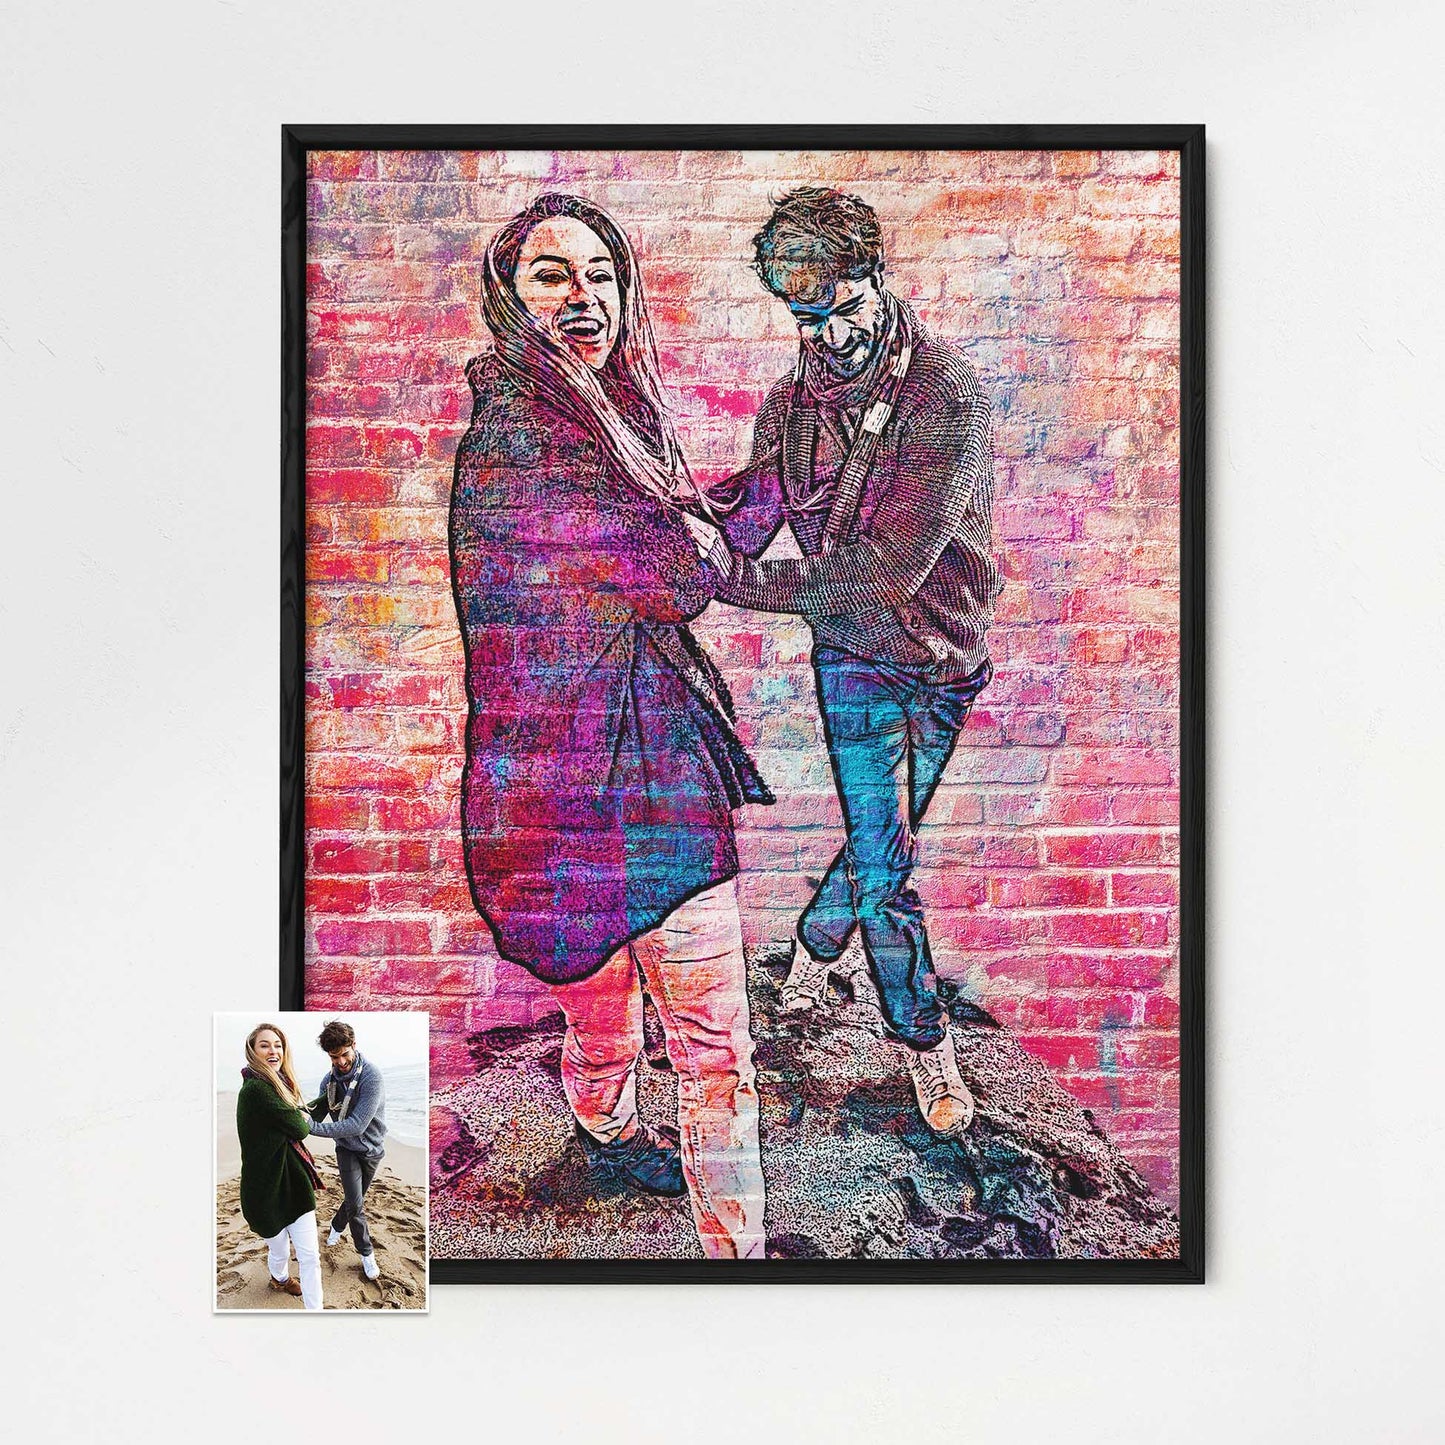 Experience the urban energy with our Personalised Brick Graffiti Street Art Framed Print. The vibrant colors and bold design capture the essence of city life, making it a perfect addition to your home decor. Whether as a gift or for you